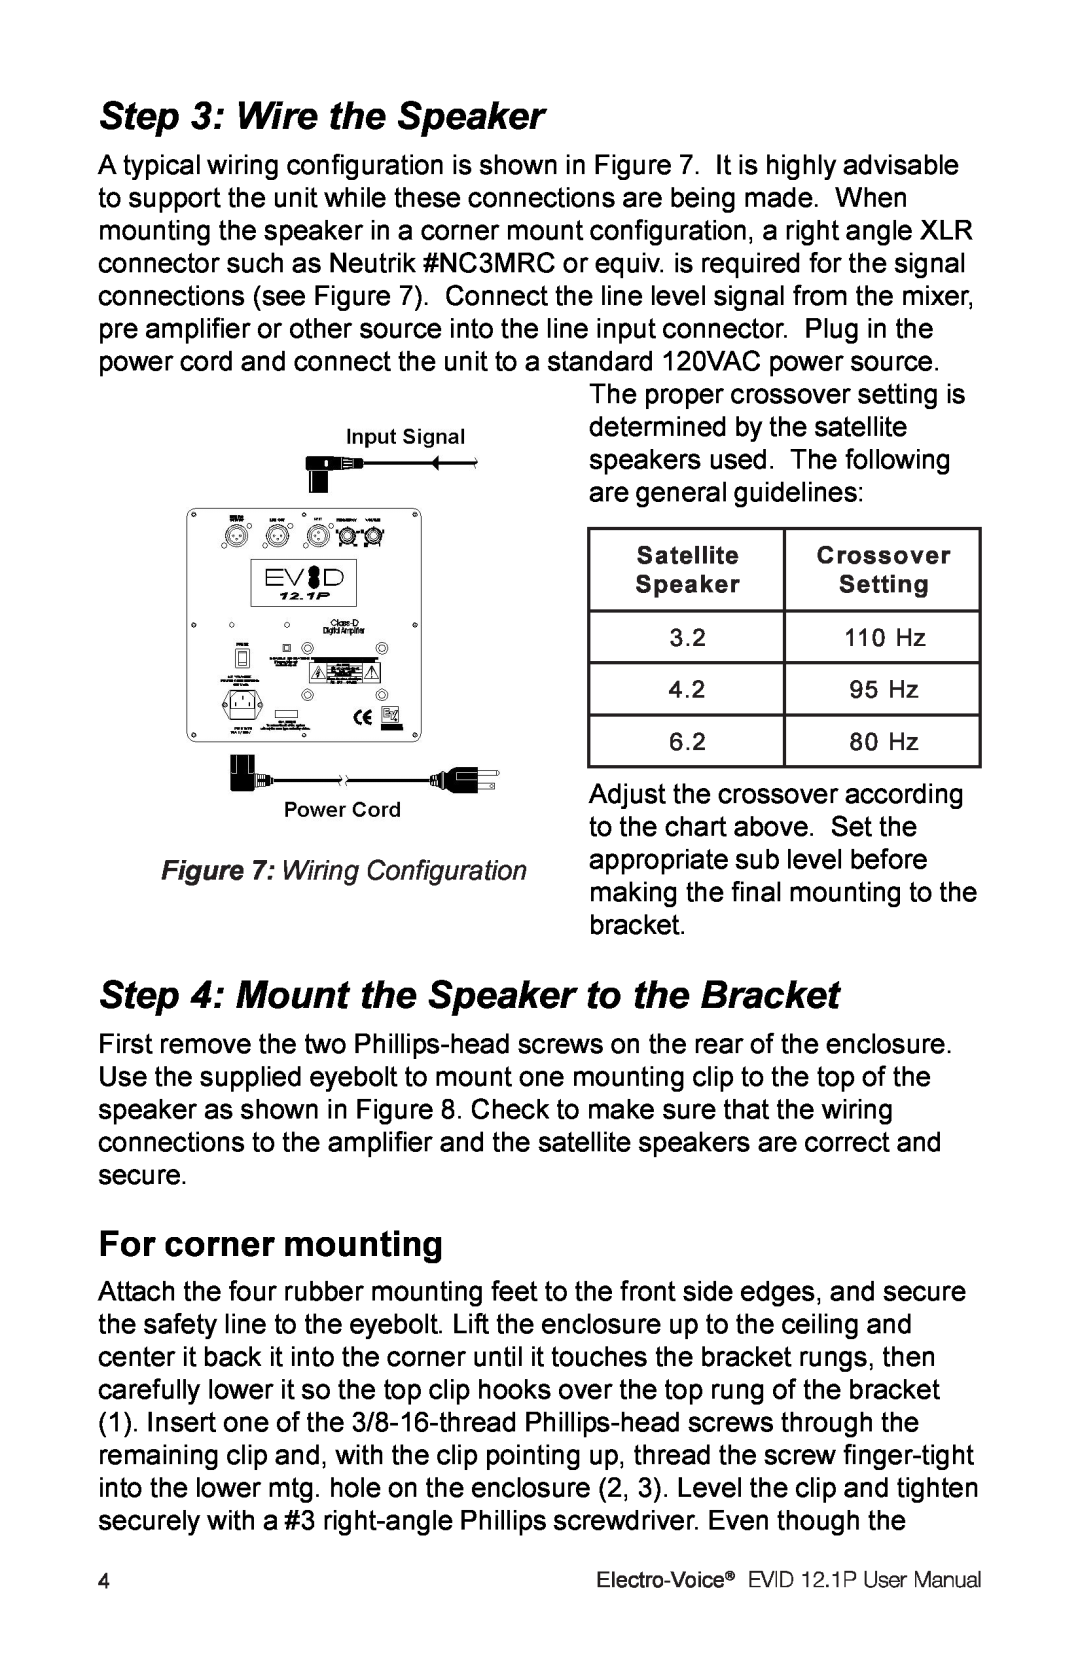 Electro-Voice 2.1P user manual Wire the Speaker, Mount the Speaker to the Bracket, For corner mounting 